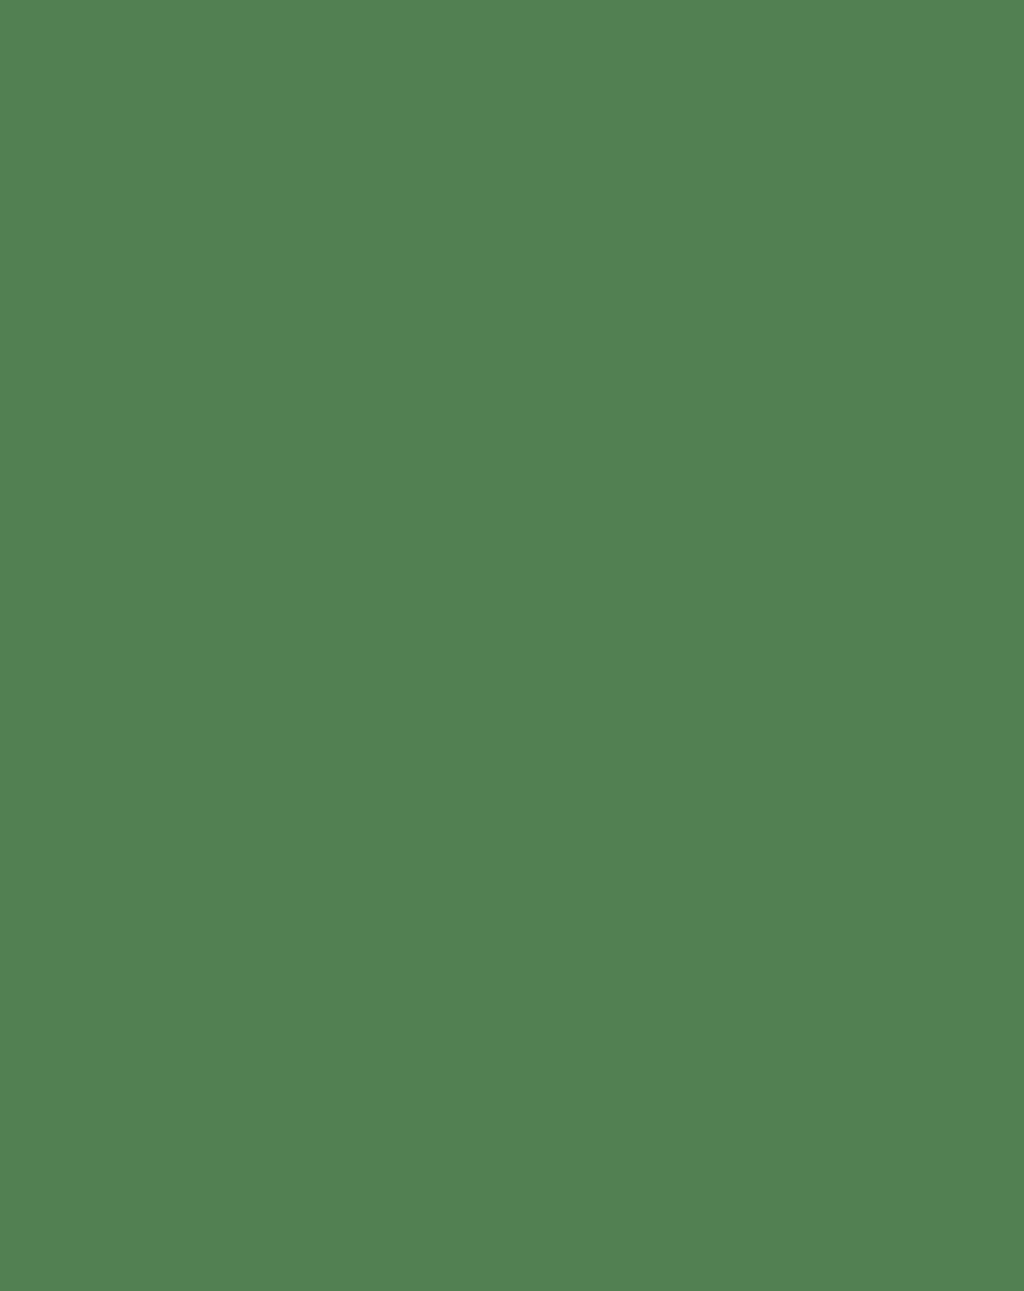 Apple Green Wrinkle-Resistant Background - Backdropsource New Zealand